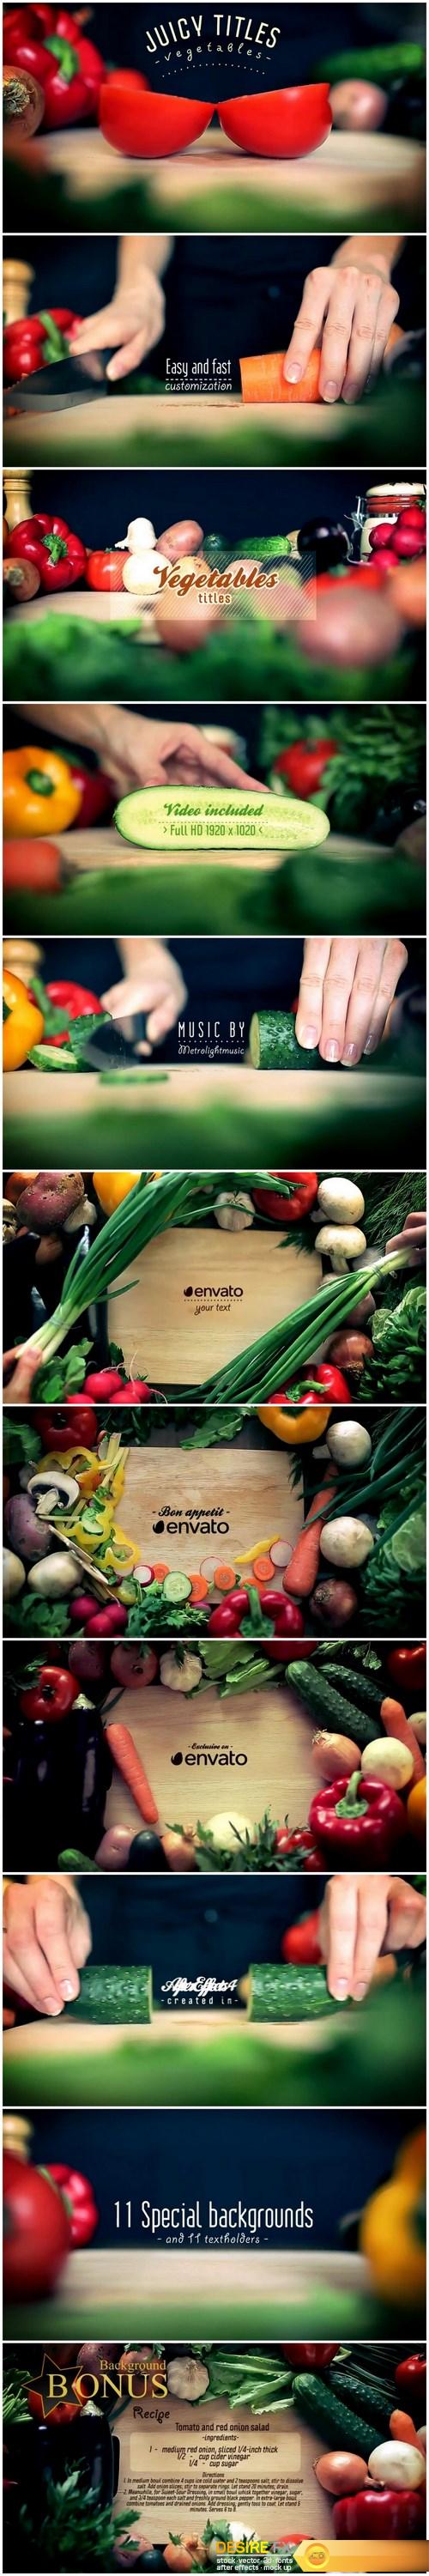 videohive-7502130-vegetables-titles